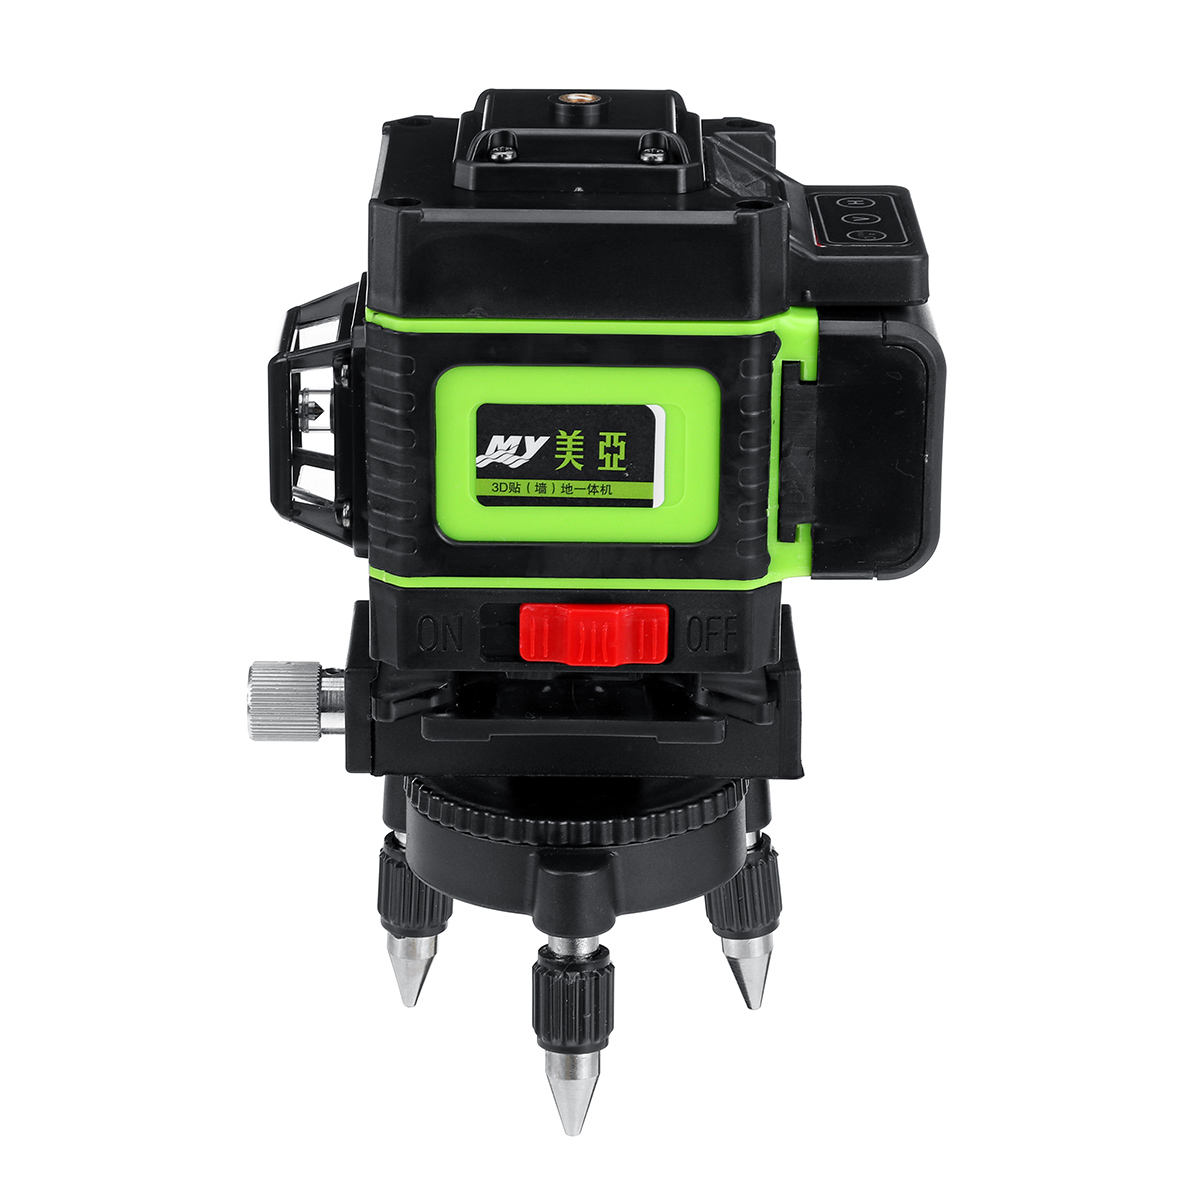 

12 Blue Lines Laser Level Measuring DevicesLine 360 Degree Rotary Horizontal And Vertical Cross Laser Level with Base